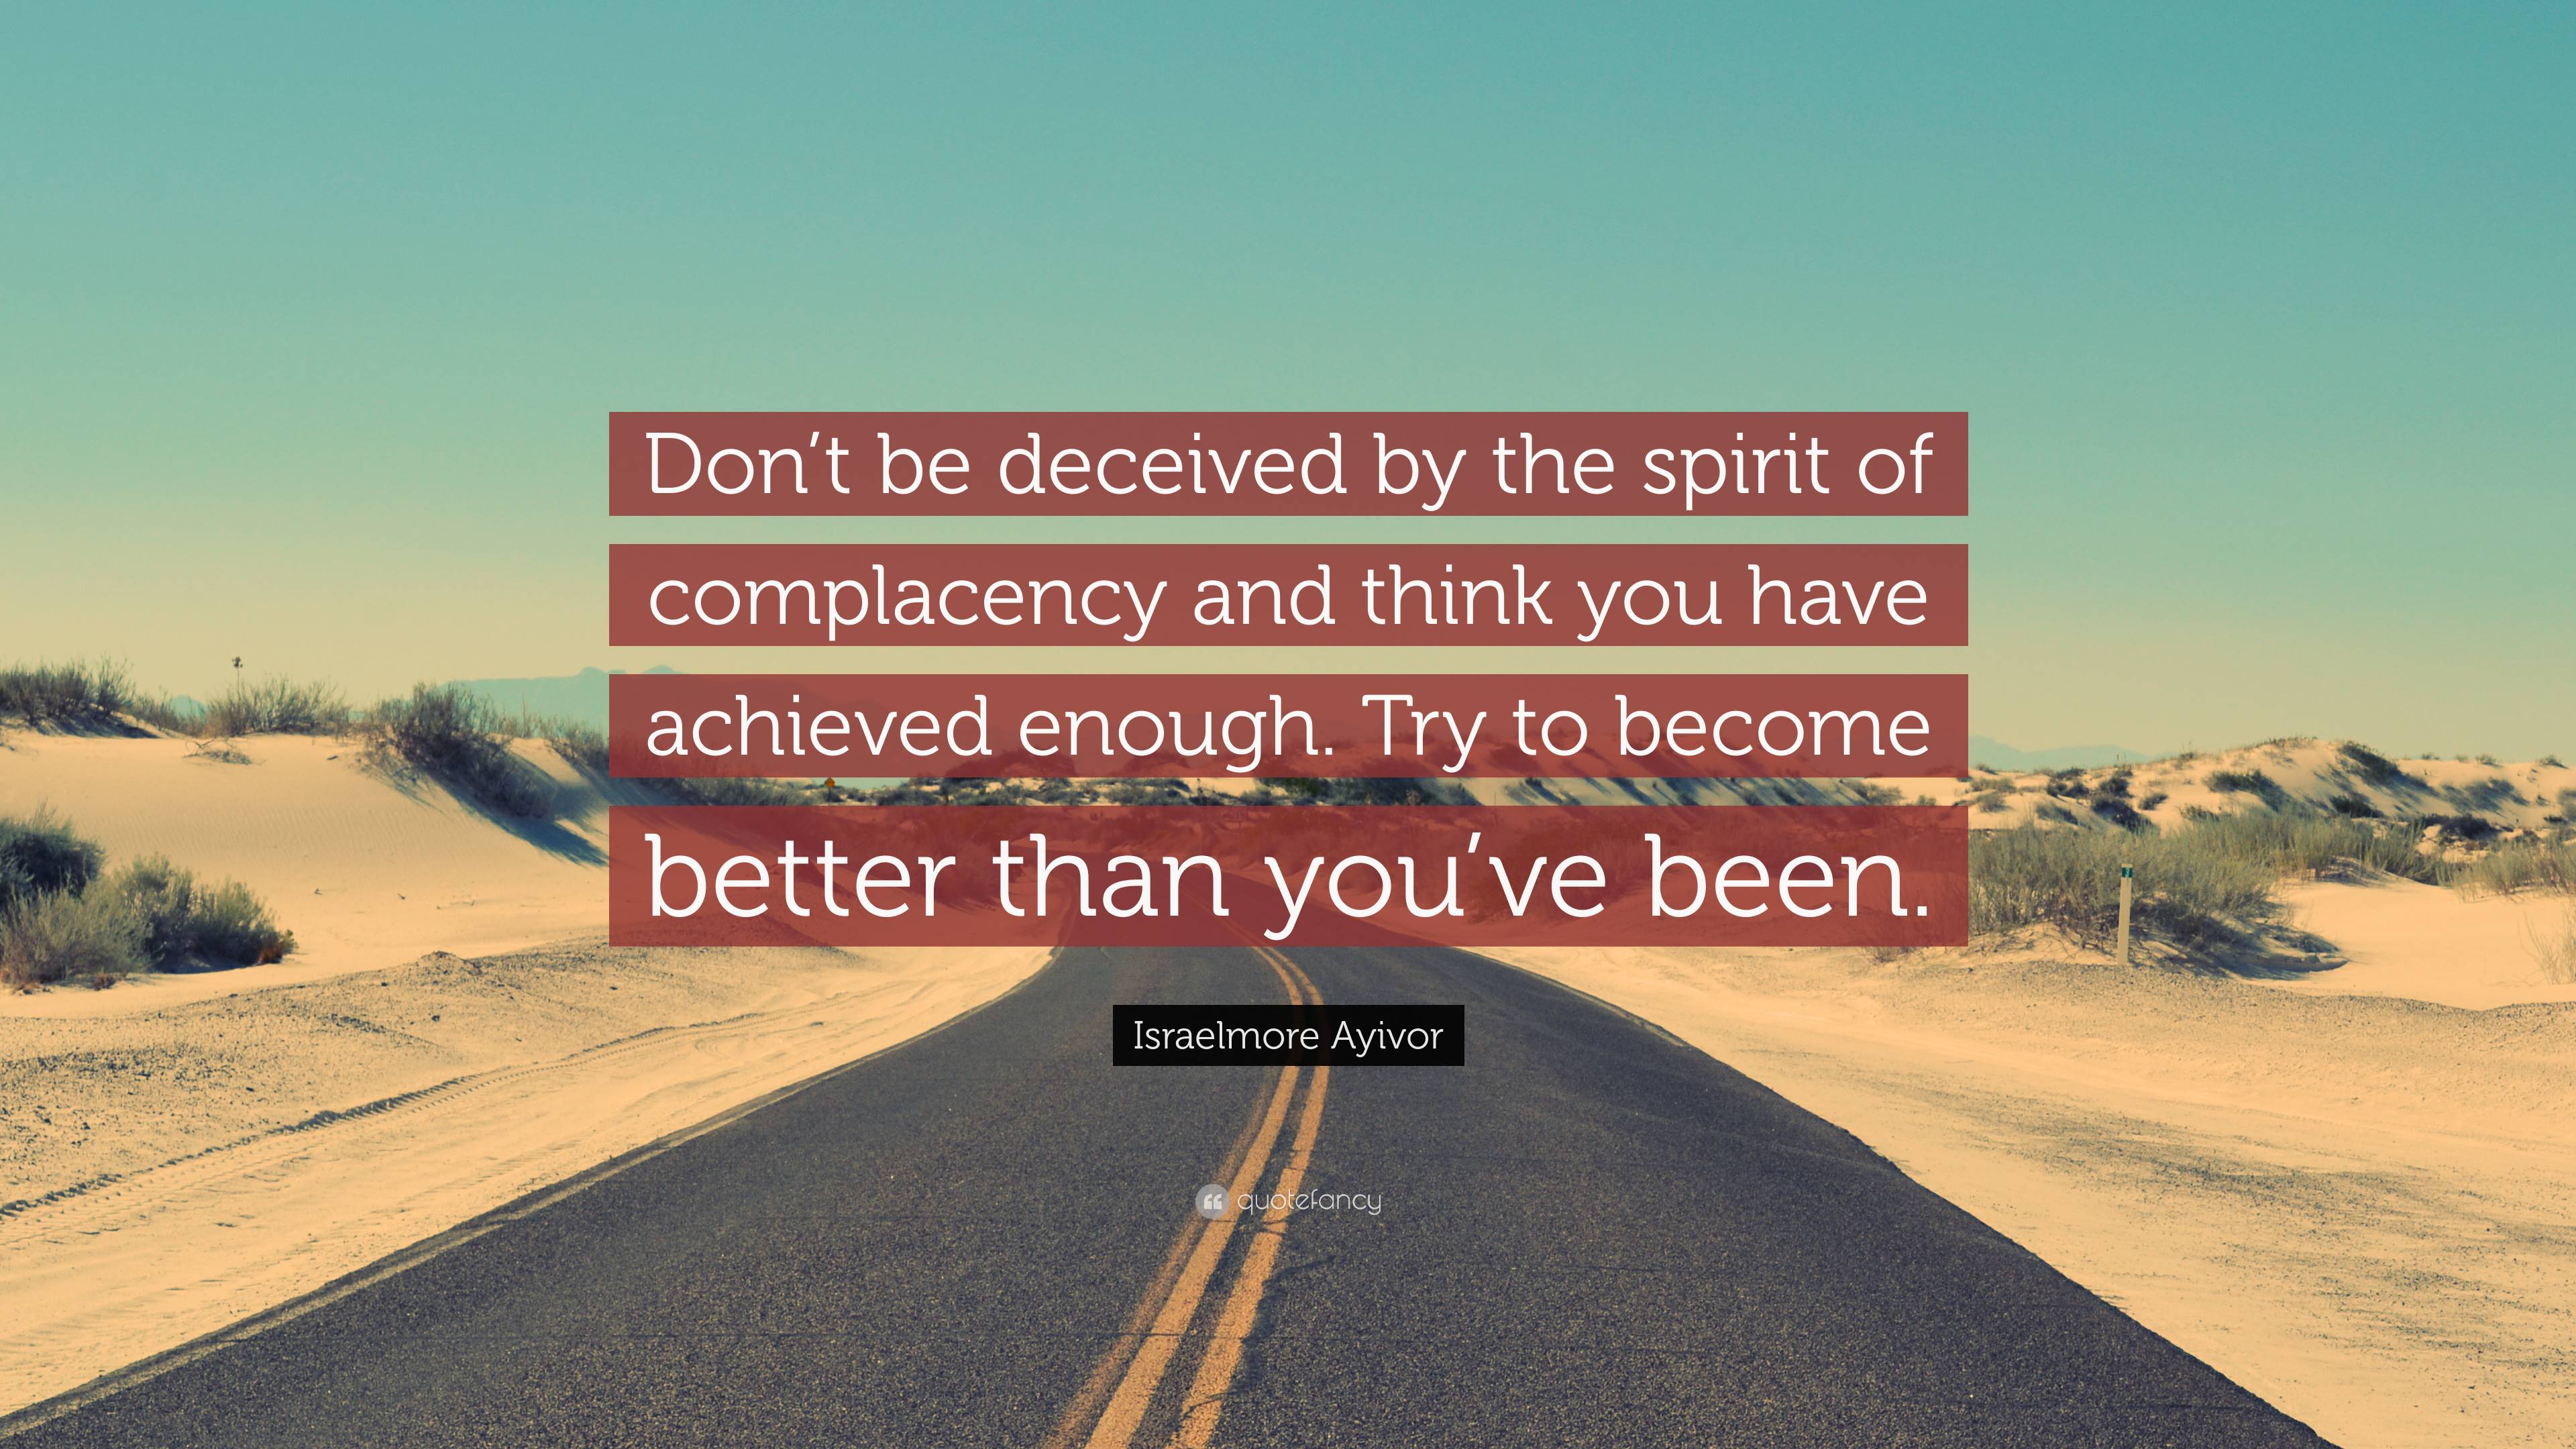 Israelmore Ayivor Quote: “Don’t be deceived by the spirit of ...